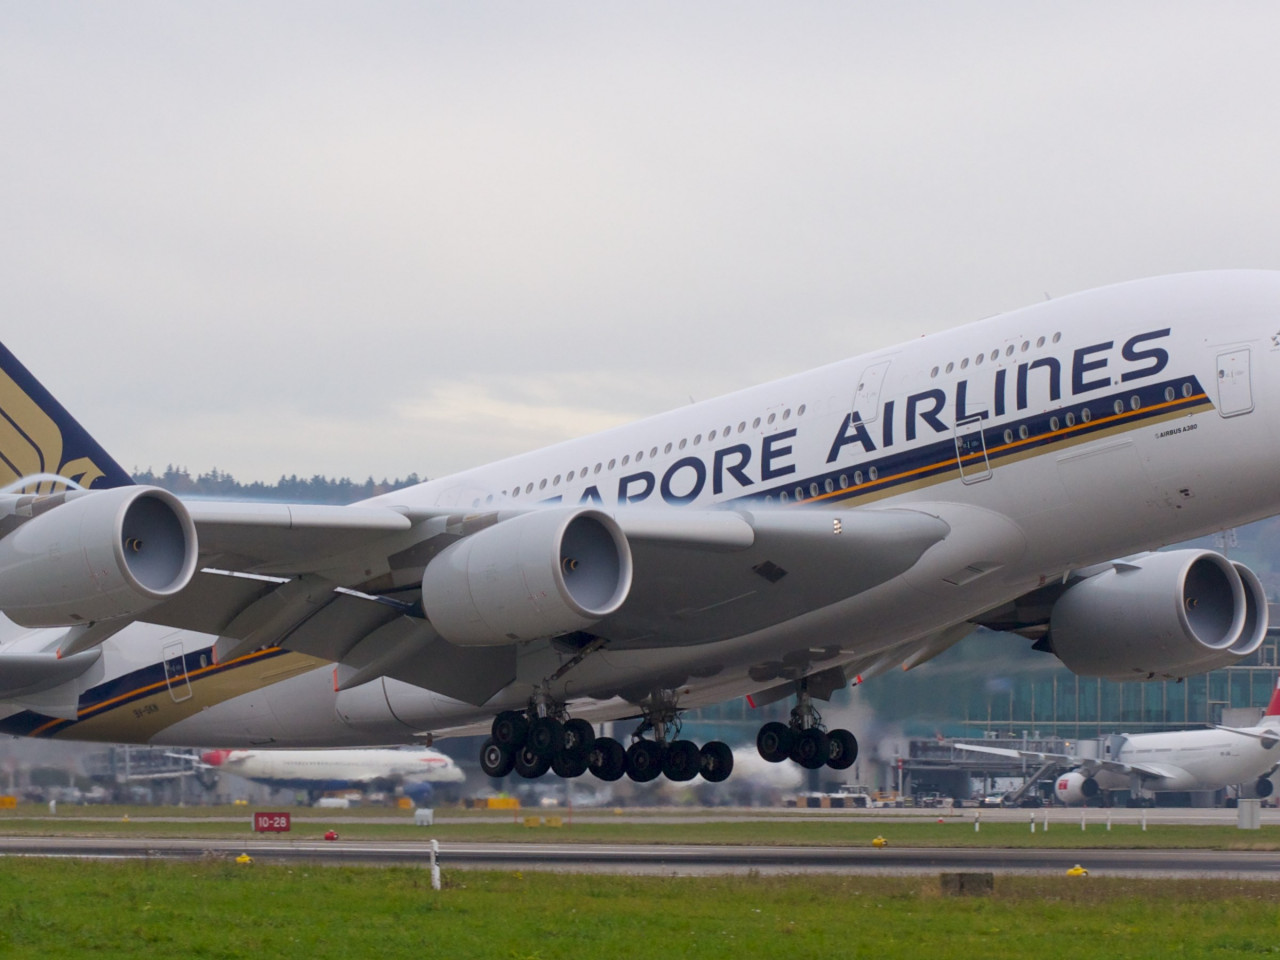 Passenger airplane from Singapore airlines wallpaper 1280x960